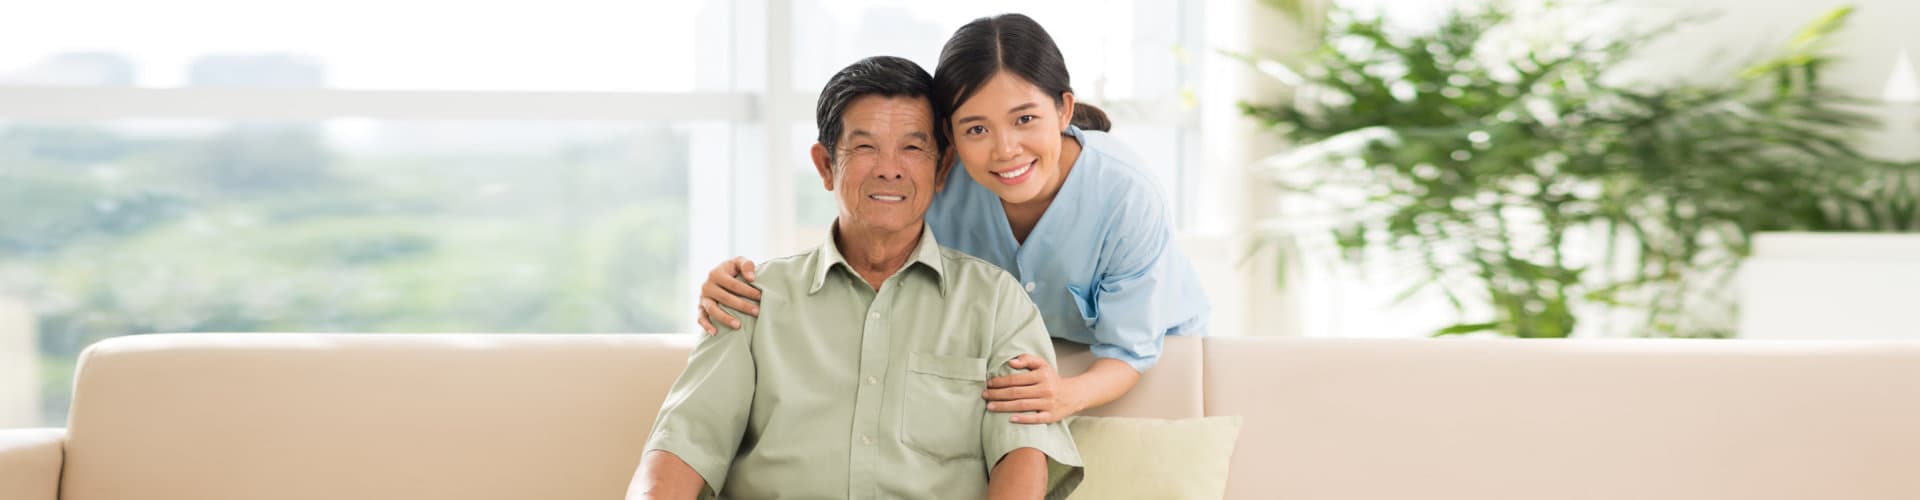 young caregiver and old man smiling